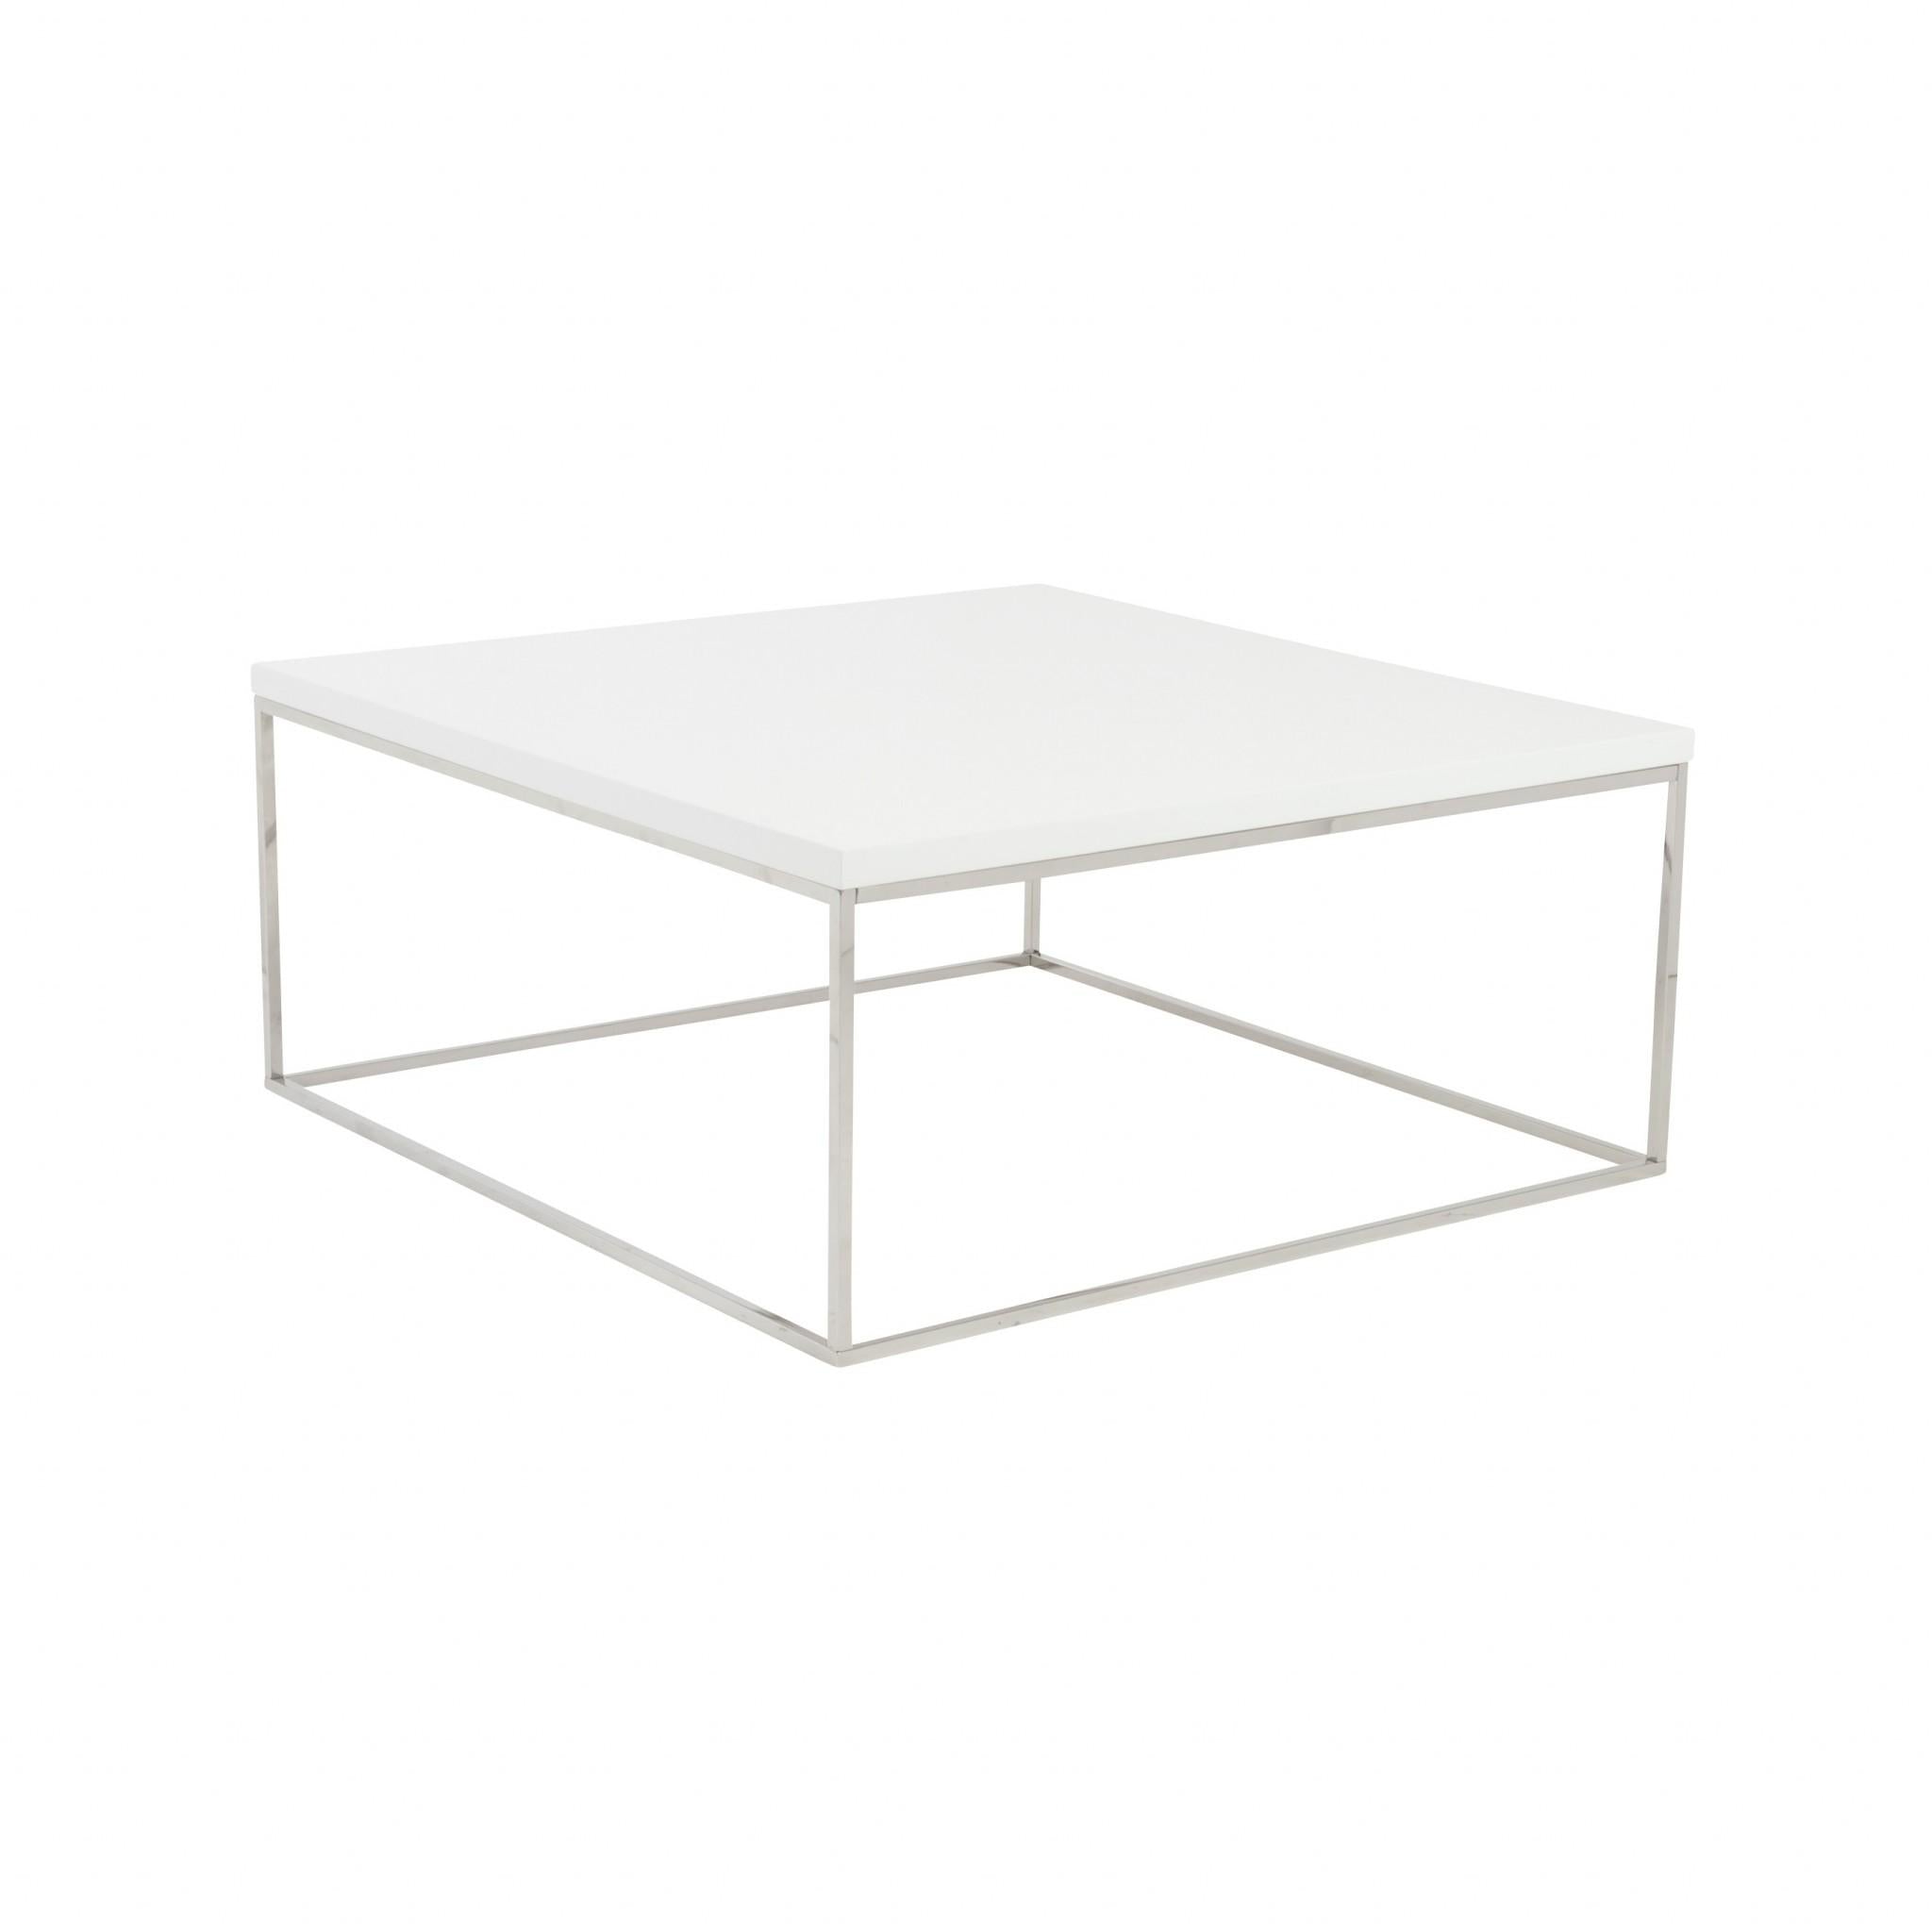 White and Chrome High Gloss Square Coffee Table